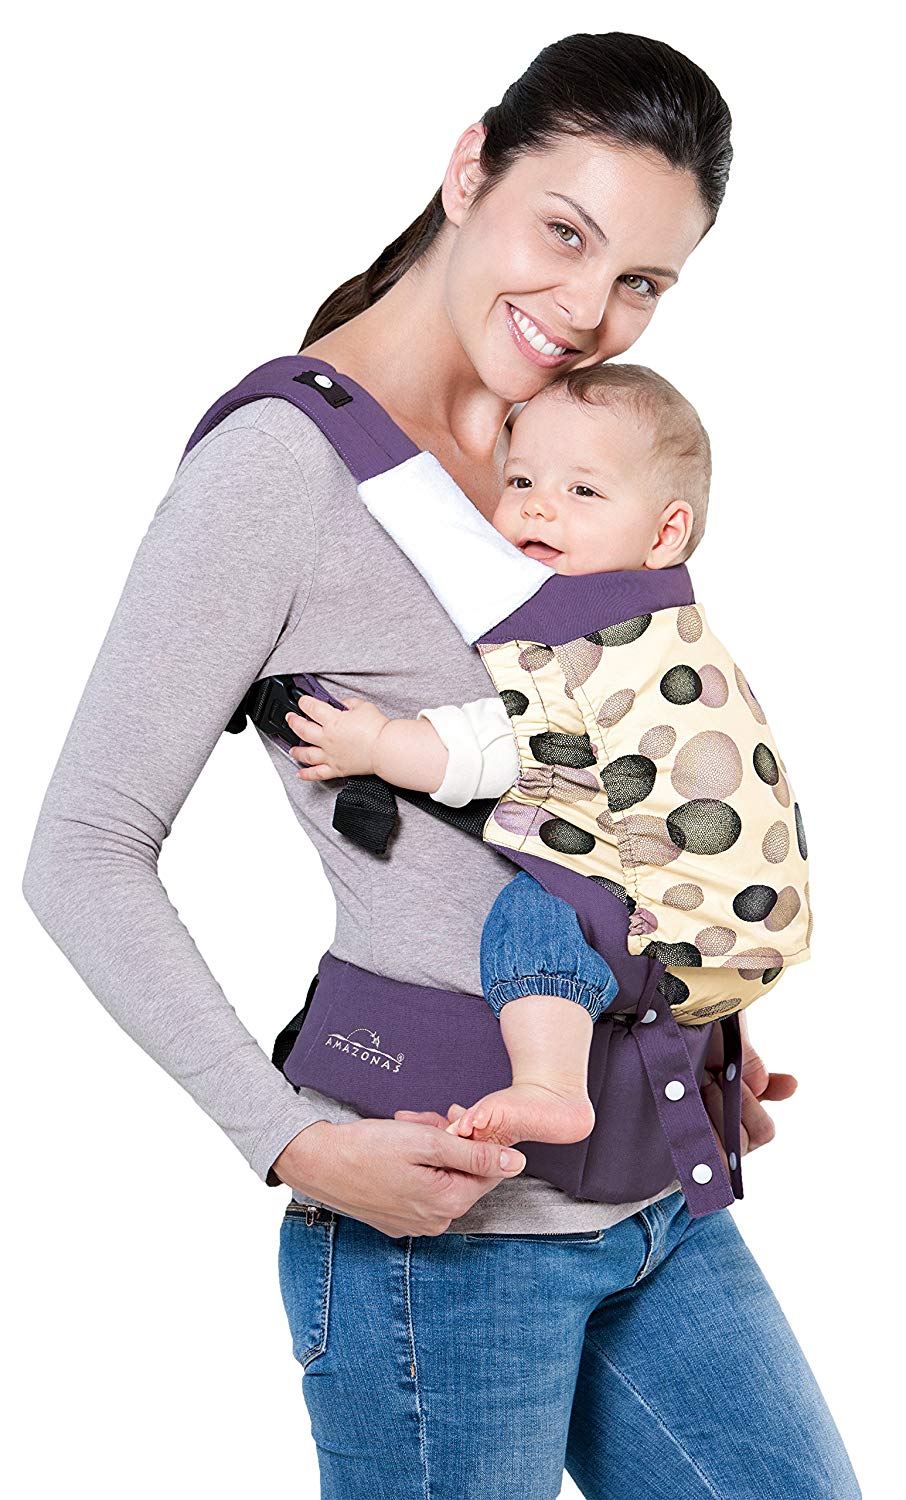 AMAZONAS Smart Carrier Baby Carrier Blueberry 0-3 Years up to 15 kg